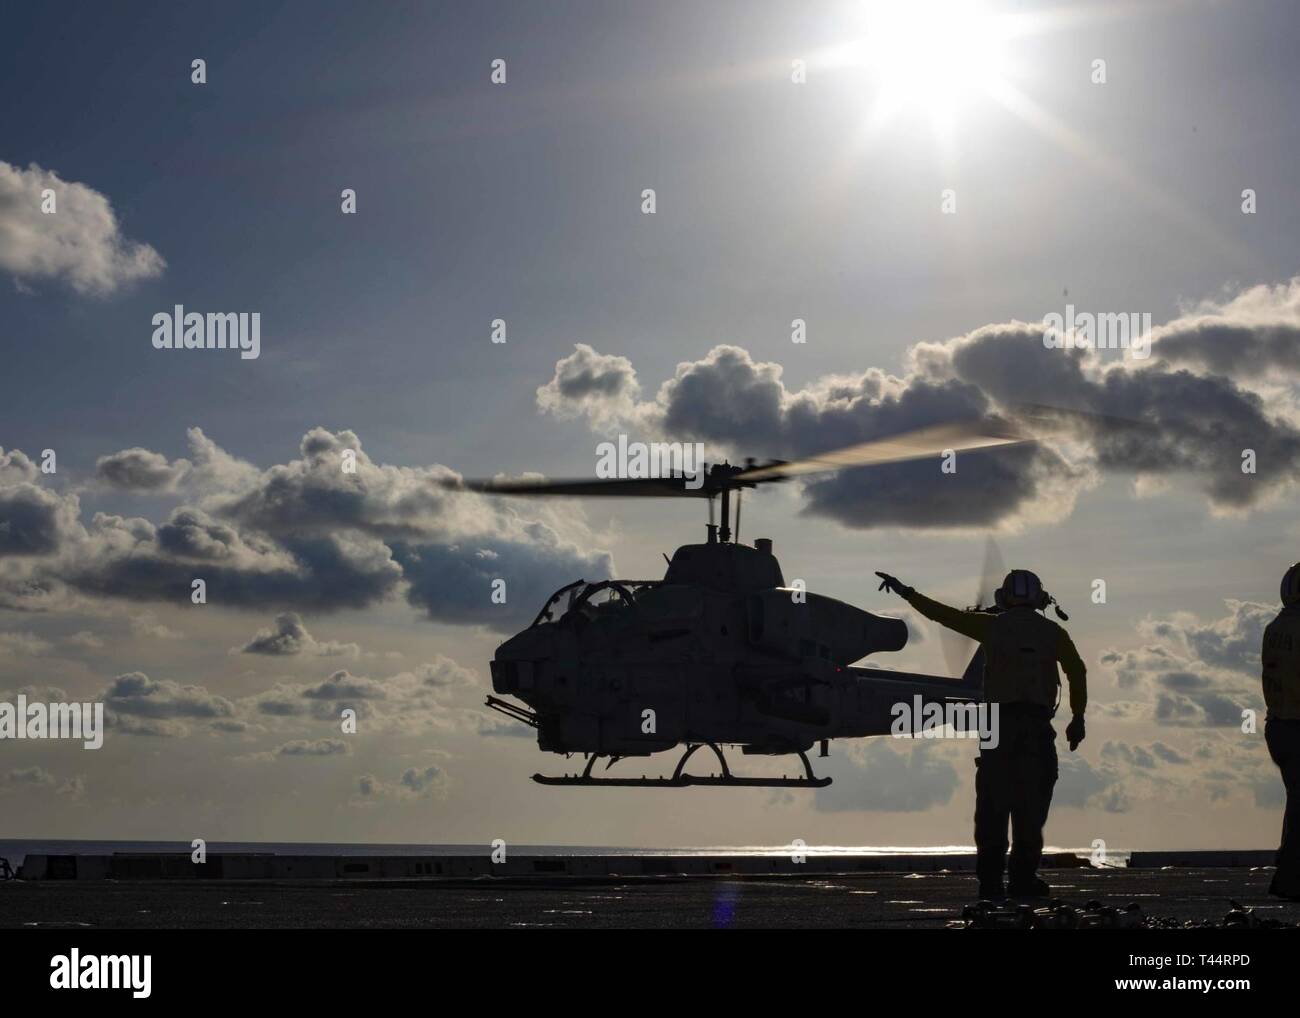 MEDITERRANEAN SEA (Feb. 21, 2019) Aviation Boatswain’s Mate (Handling) 3rd Class Devin Lewis signals to an AH-1W Super Cobra helicopter assigned to the “Black Knights” of Marine Medium Tiltrotor Squadron (VMM) 264 (Reinforced) to depart the flight deck of the San Antonio-class amphibious transport dock ship USS Arlington (LPD 24), Feb. 21, 2019. Arlington is on a scheduled deployment as part of the Kearsarge Amphibious Ready Group in support of maritime security operations, crisis response and theater security cooperation, while also providing a forward naval presence. Stock Photo